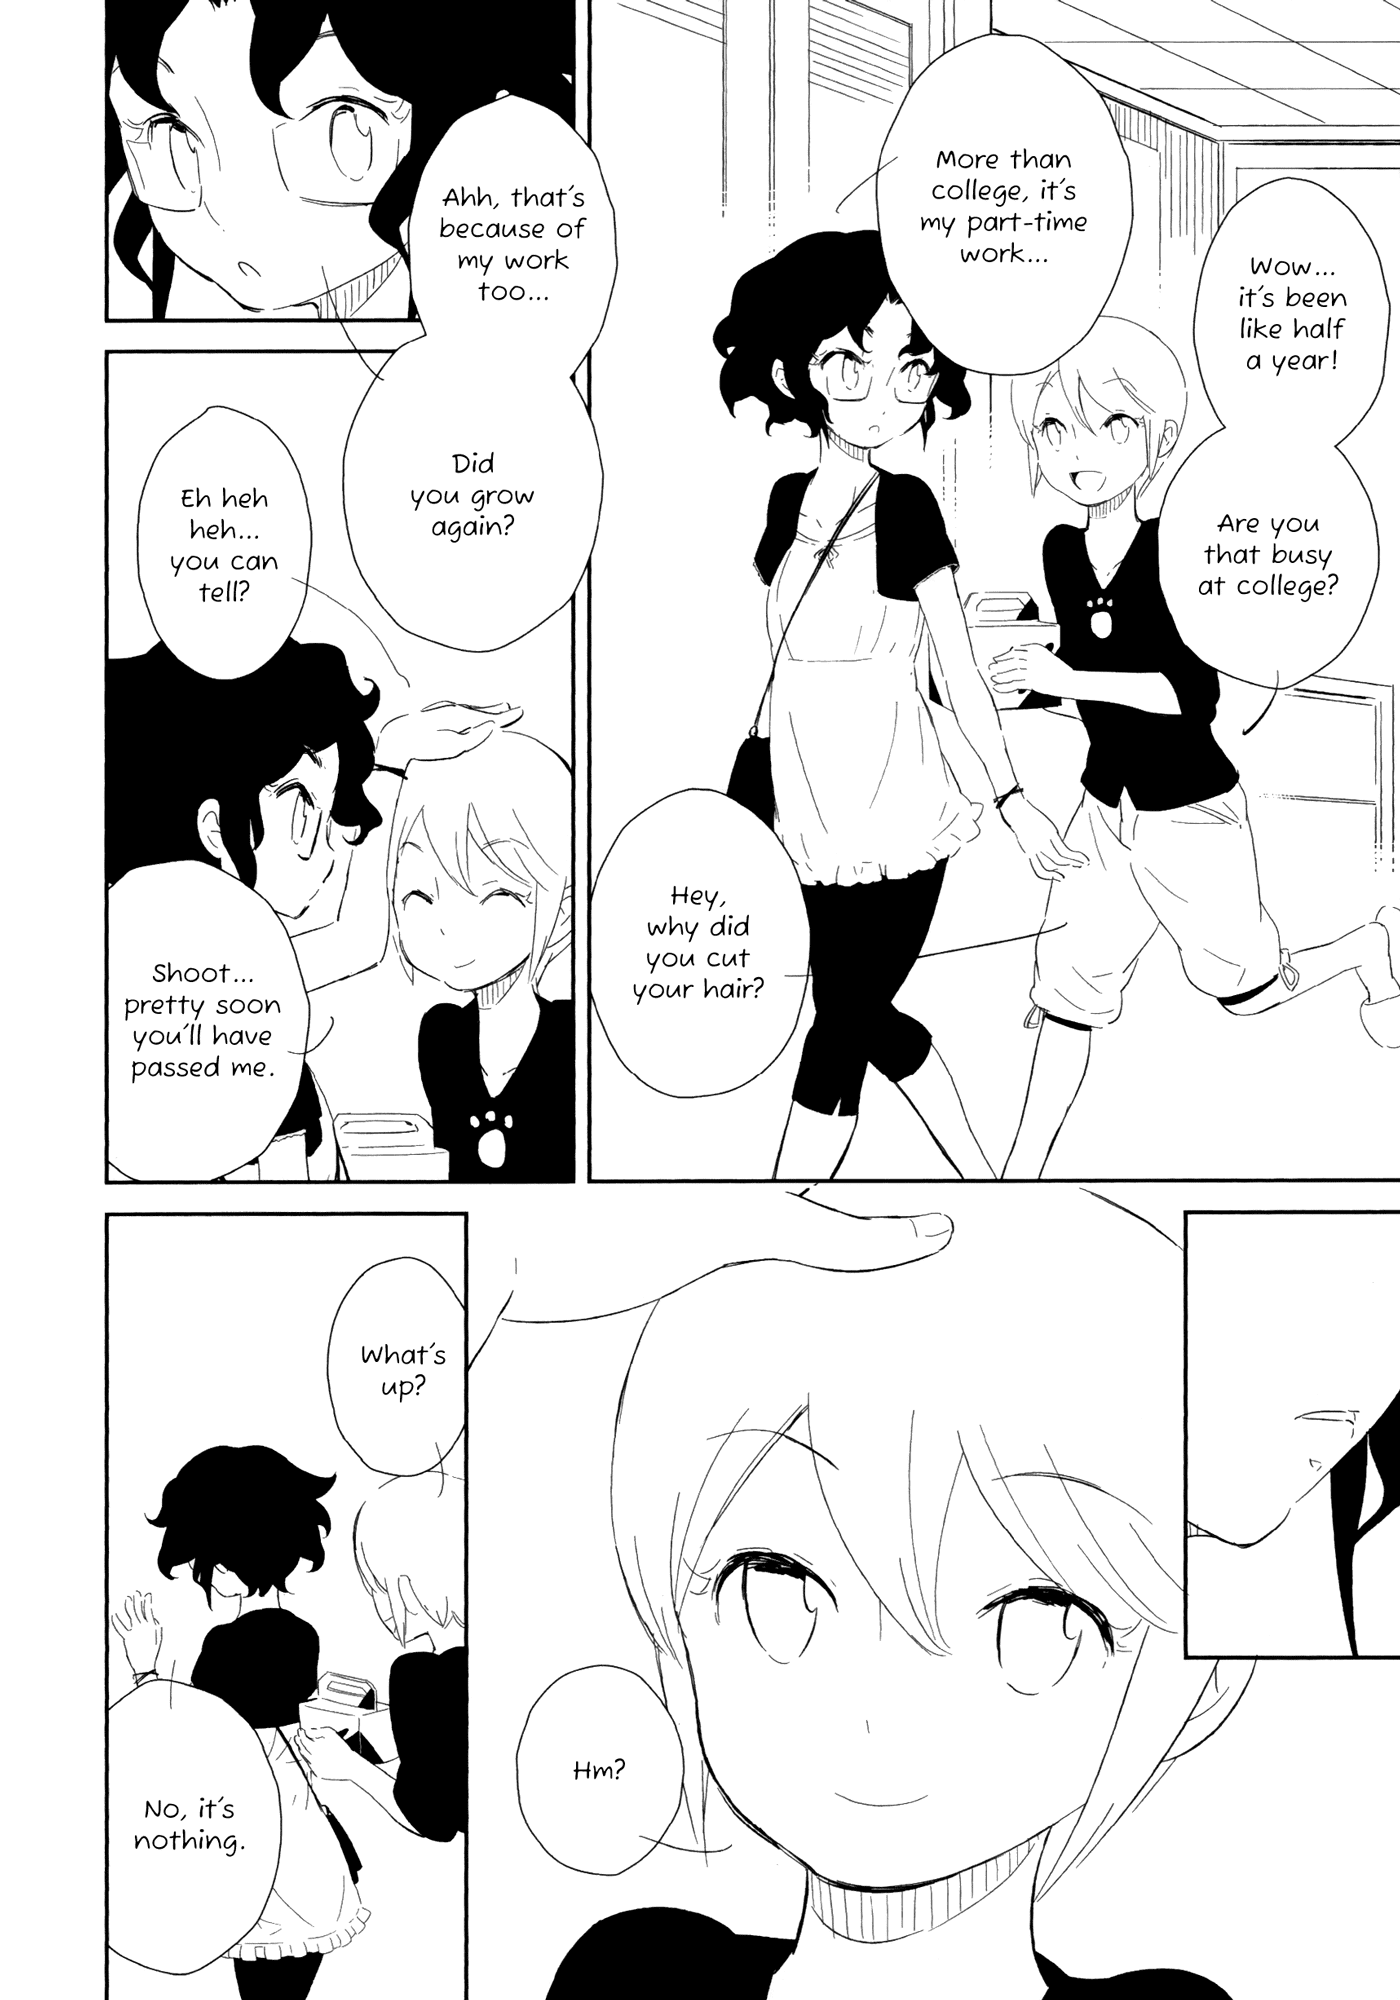 Witch Meets Knight - Page 2